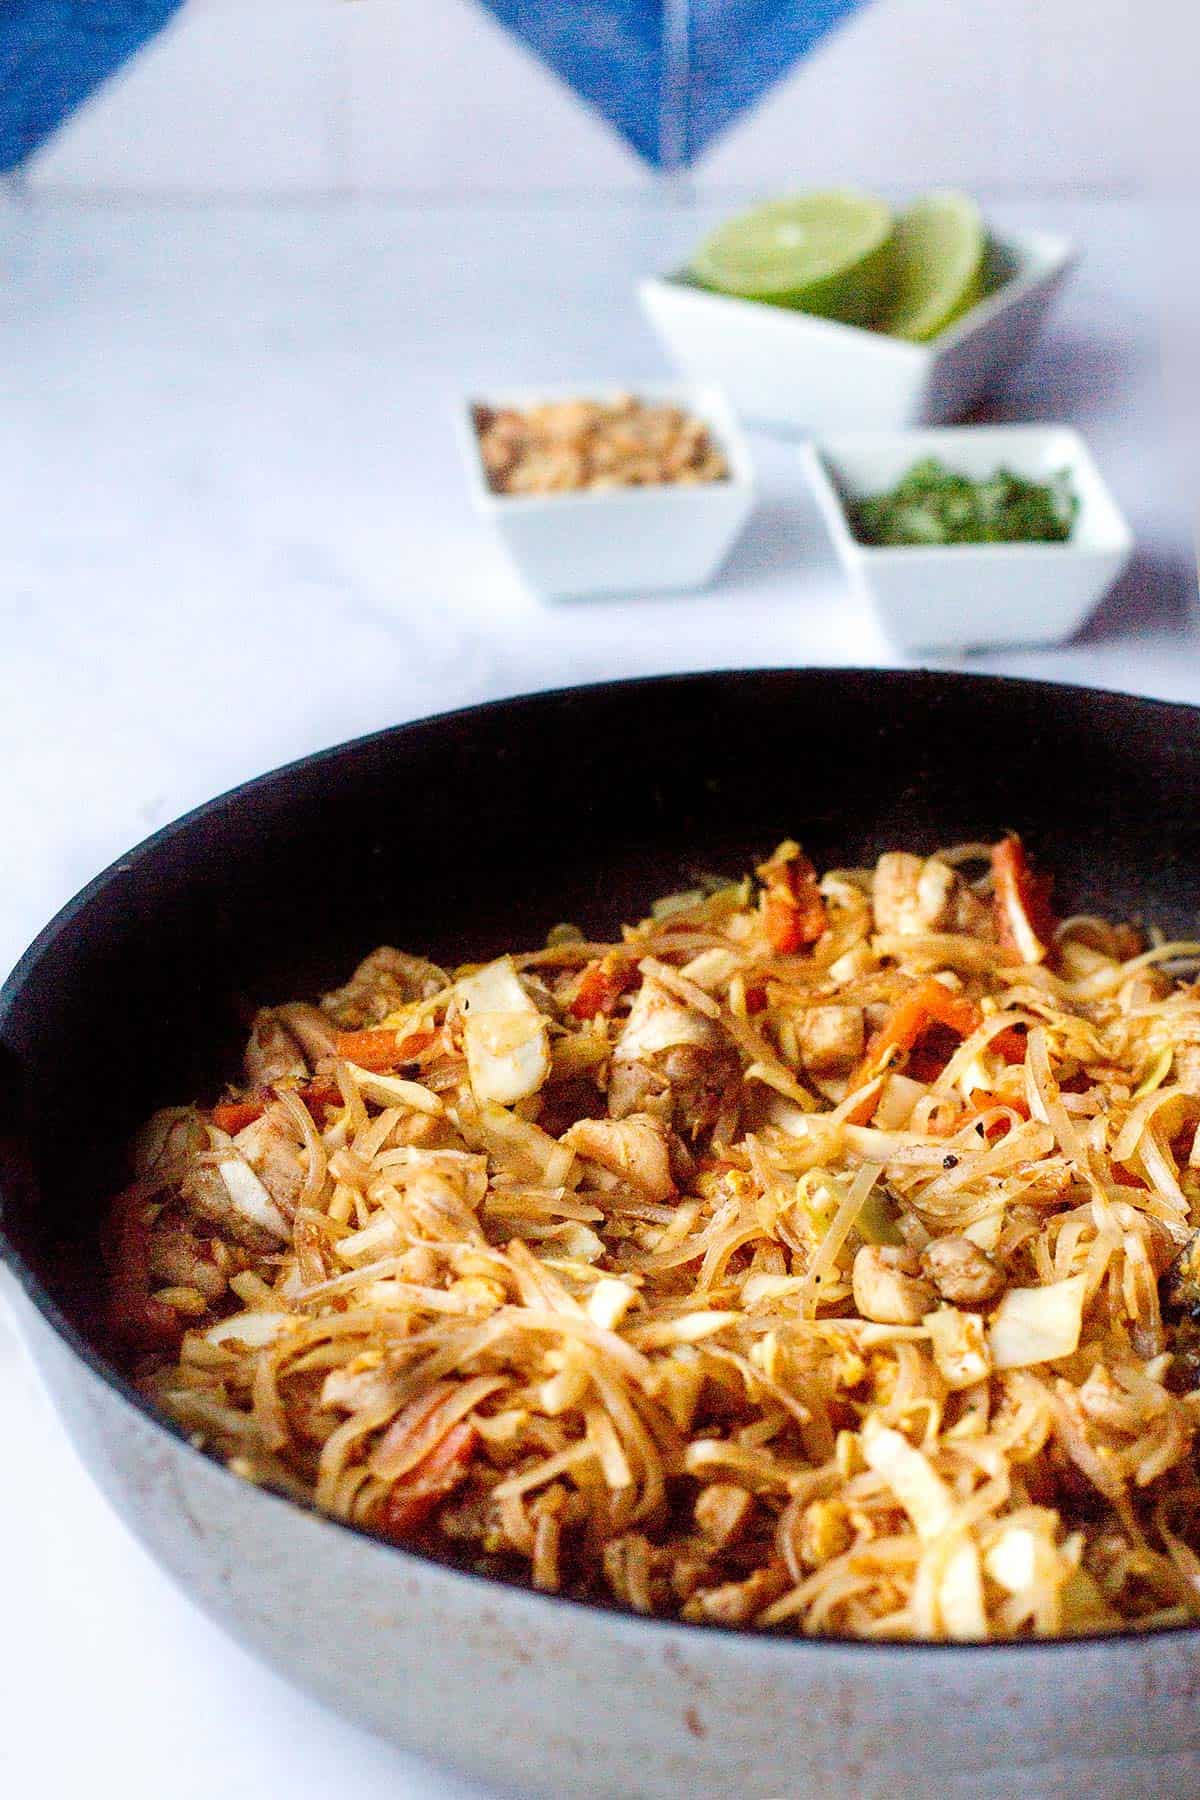 Skillet with finished chicken pad thai.